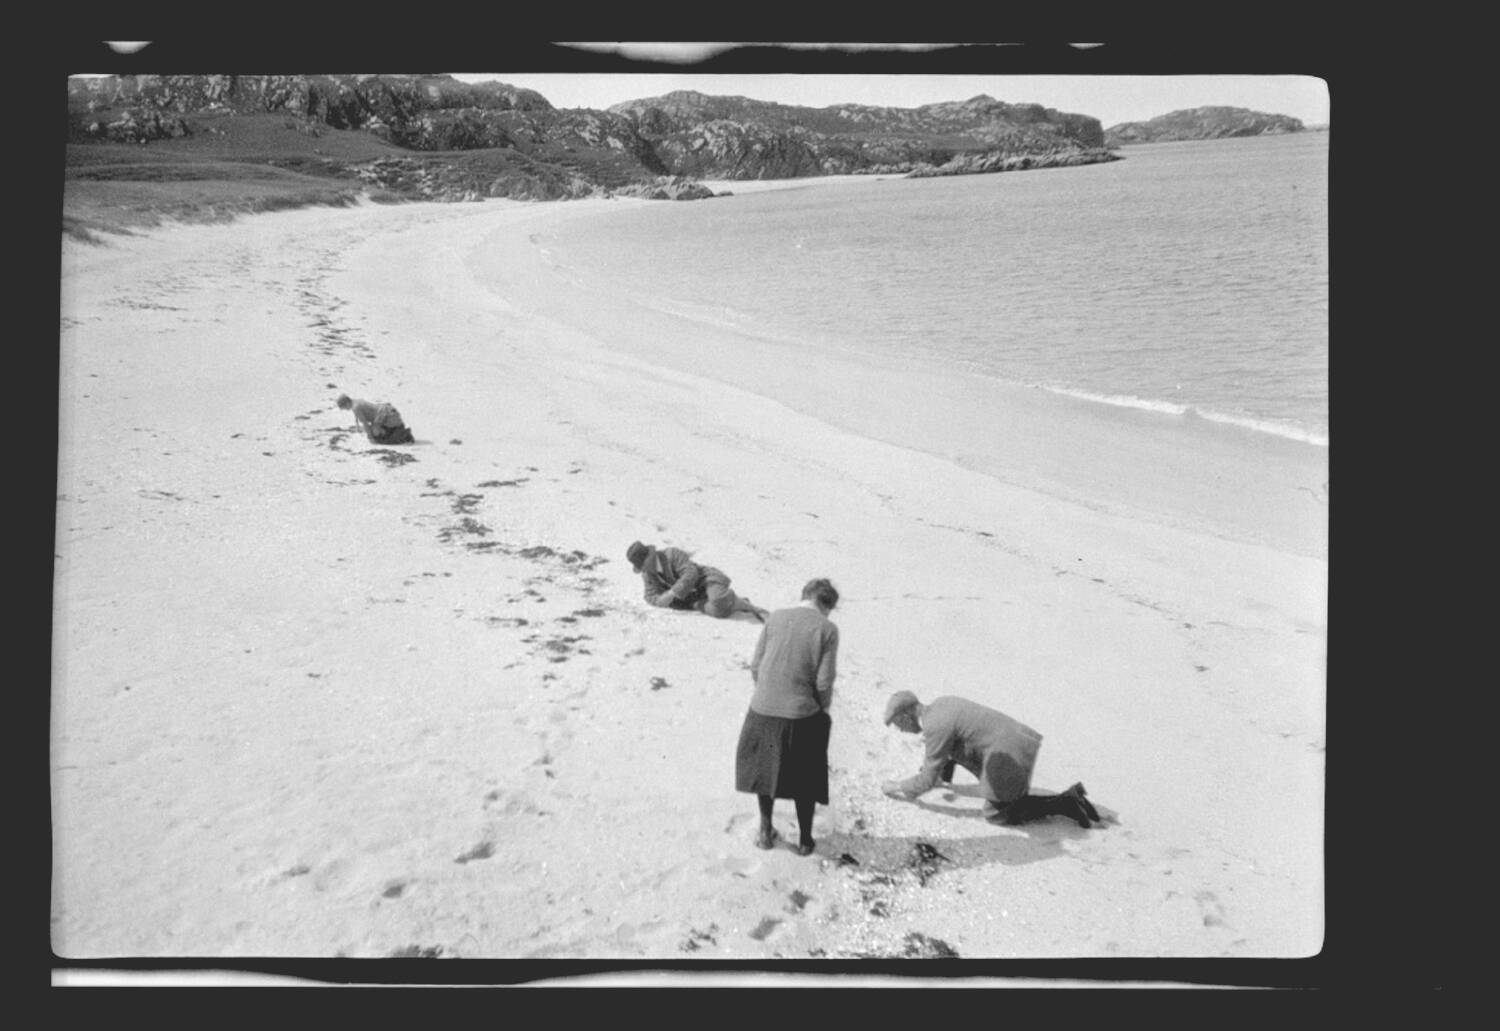 A black and white photo of four people looking for shells on a sandy beach. Three sit or crouch on the beach, running their hands through the sand. The fourth woman stands and leans over the man closest to the foreground.